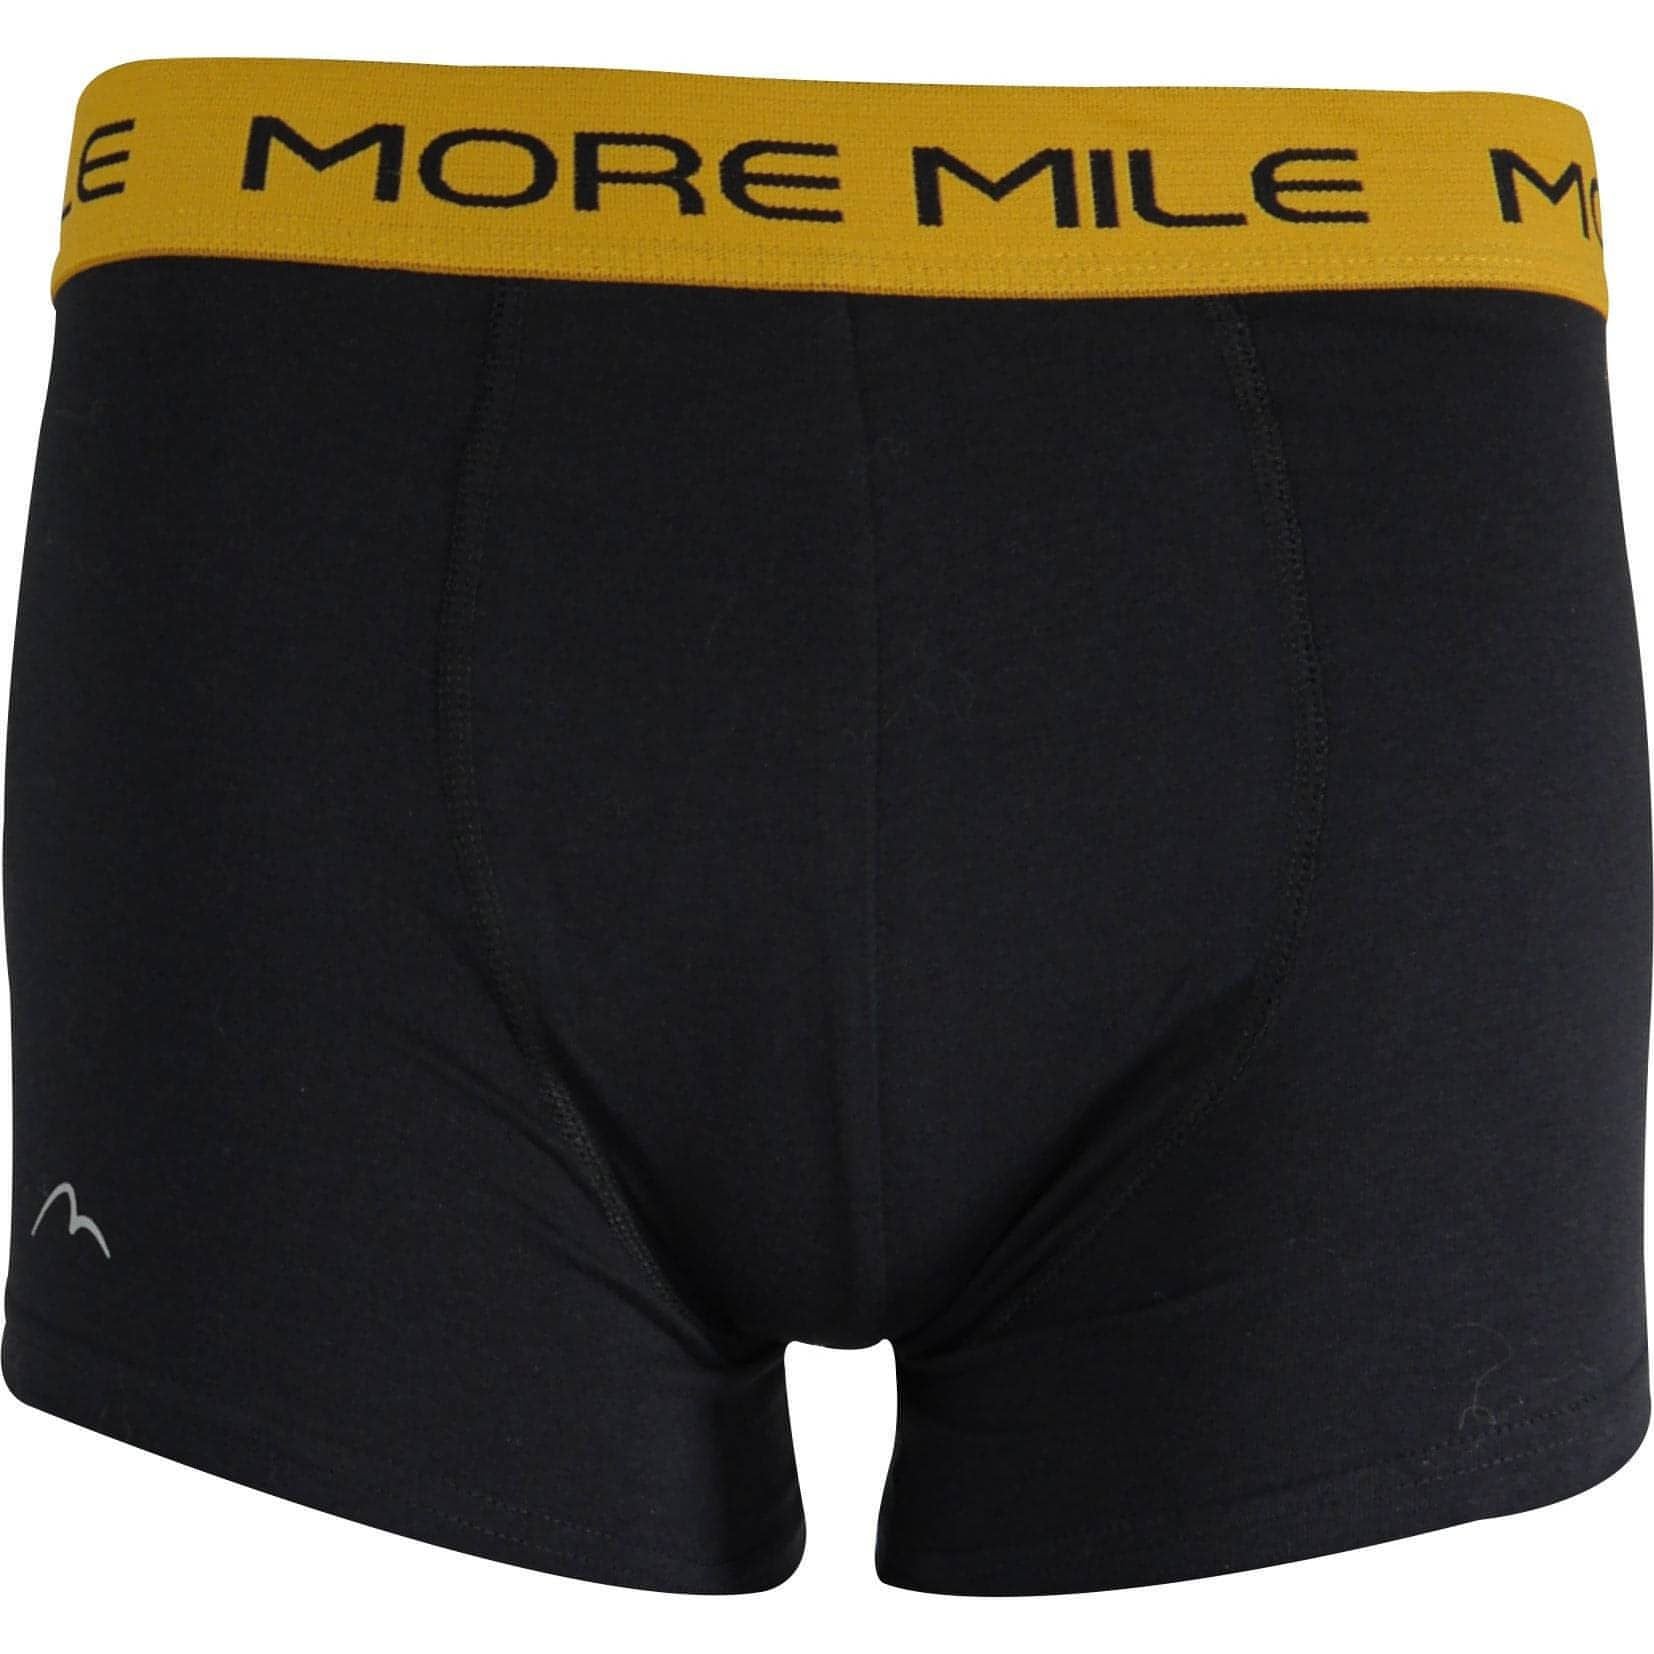 More Mile Pack Boxer 1P204891Wm Bluegold Gold Front - Front View